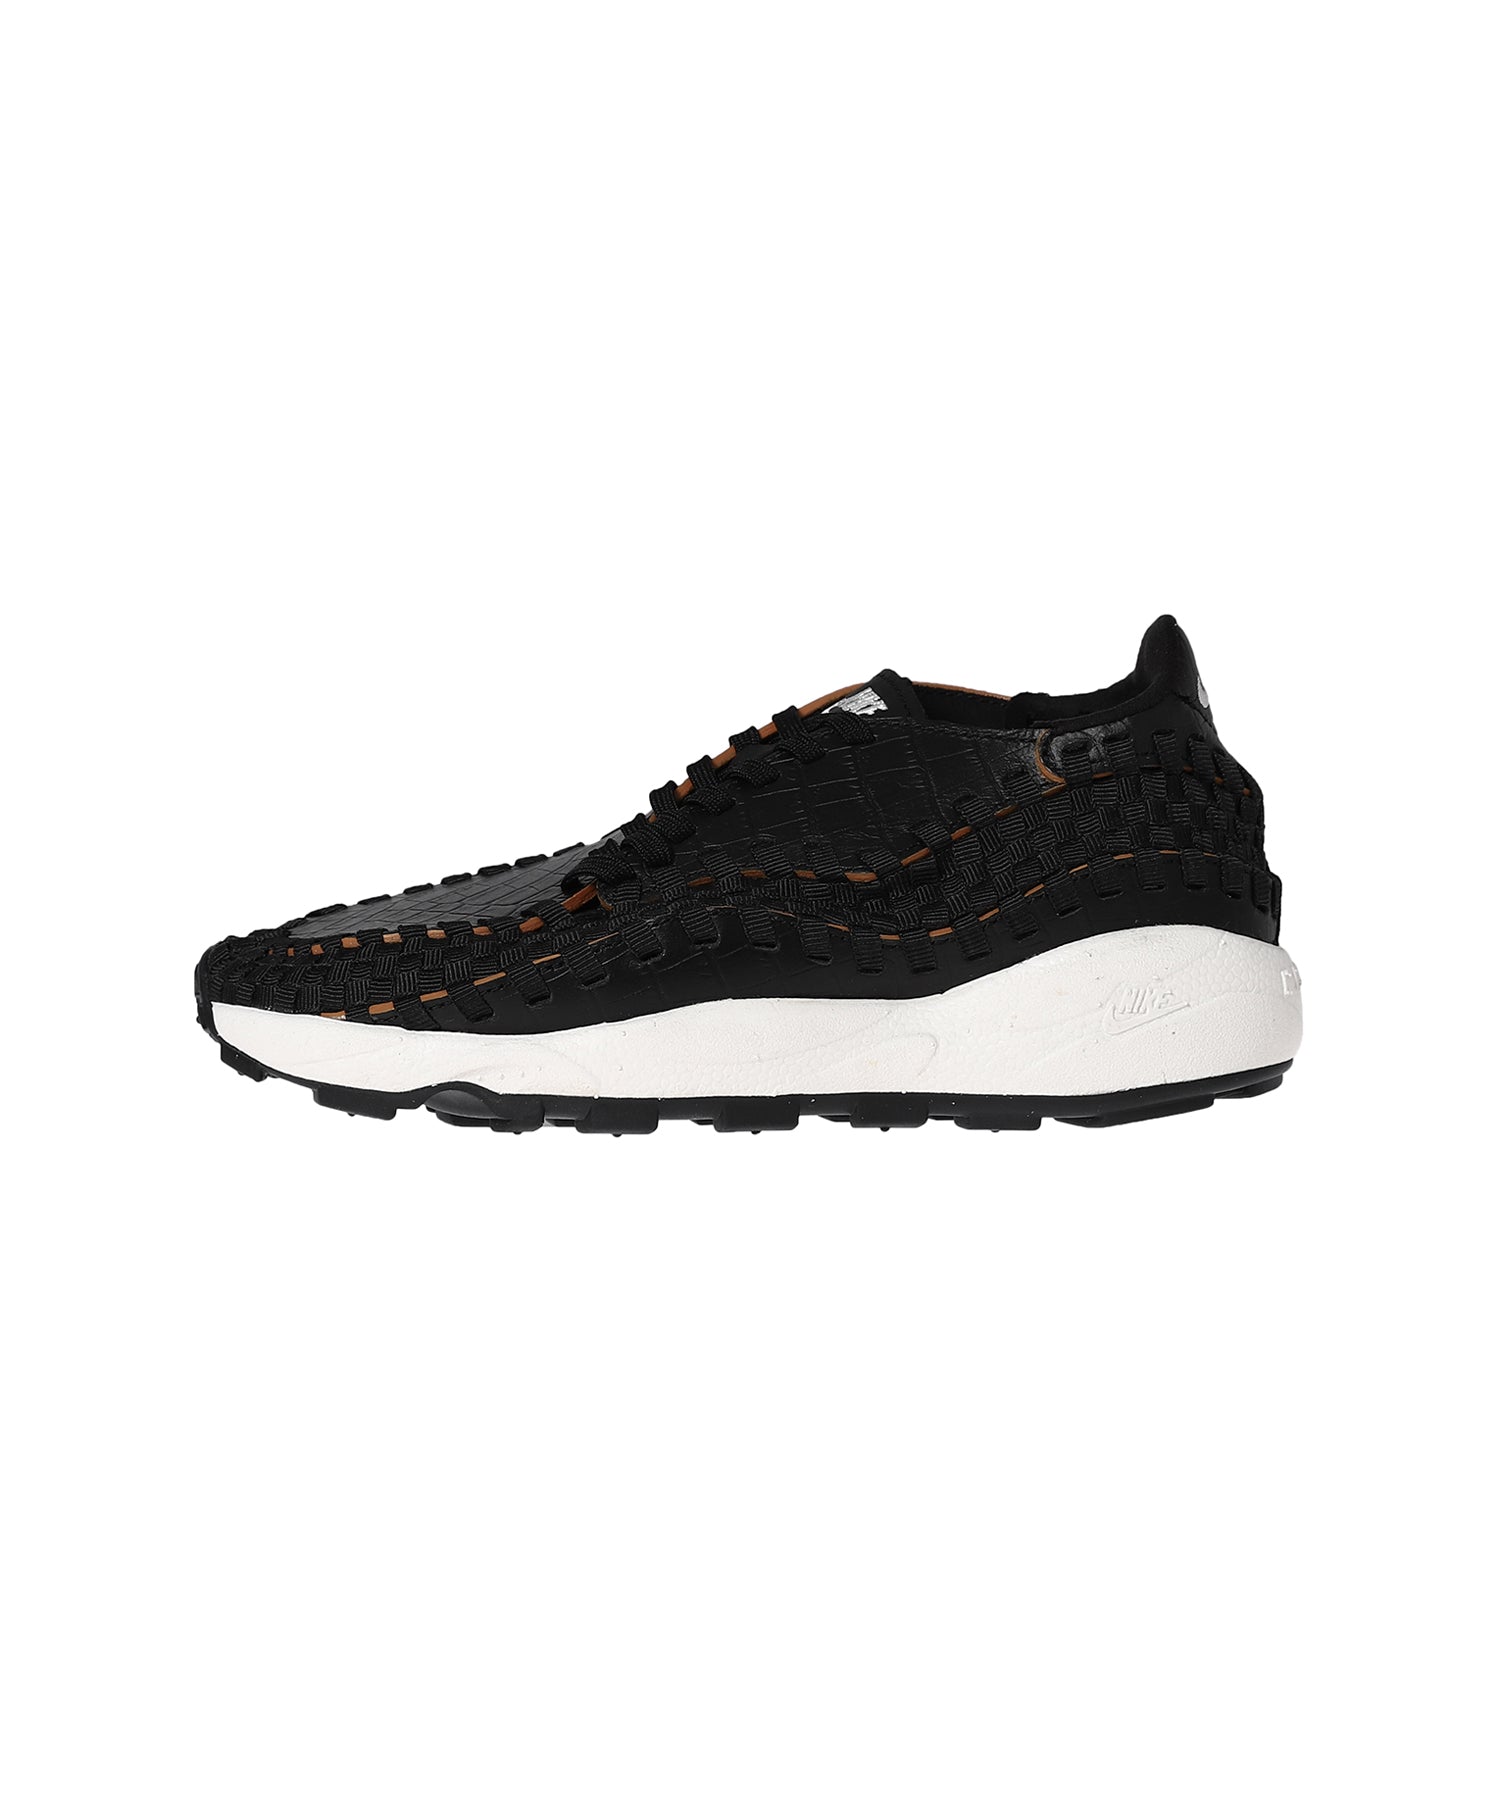 Nike WMNS Air Footscape Woven